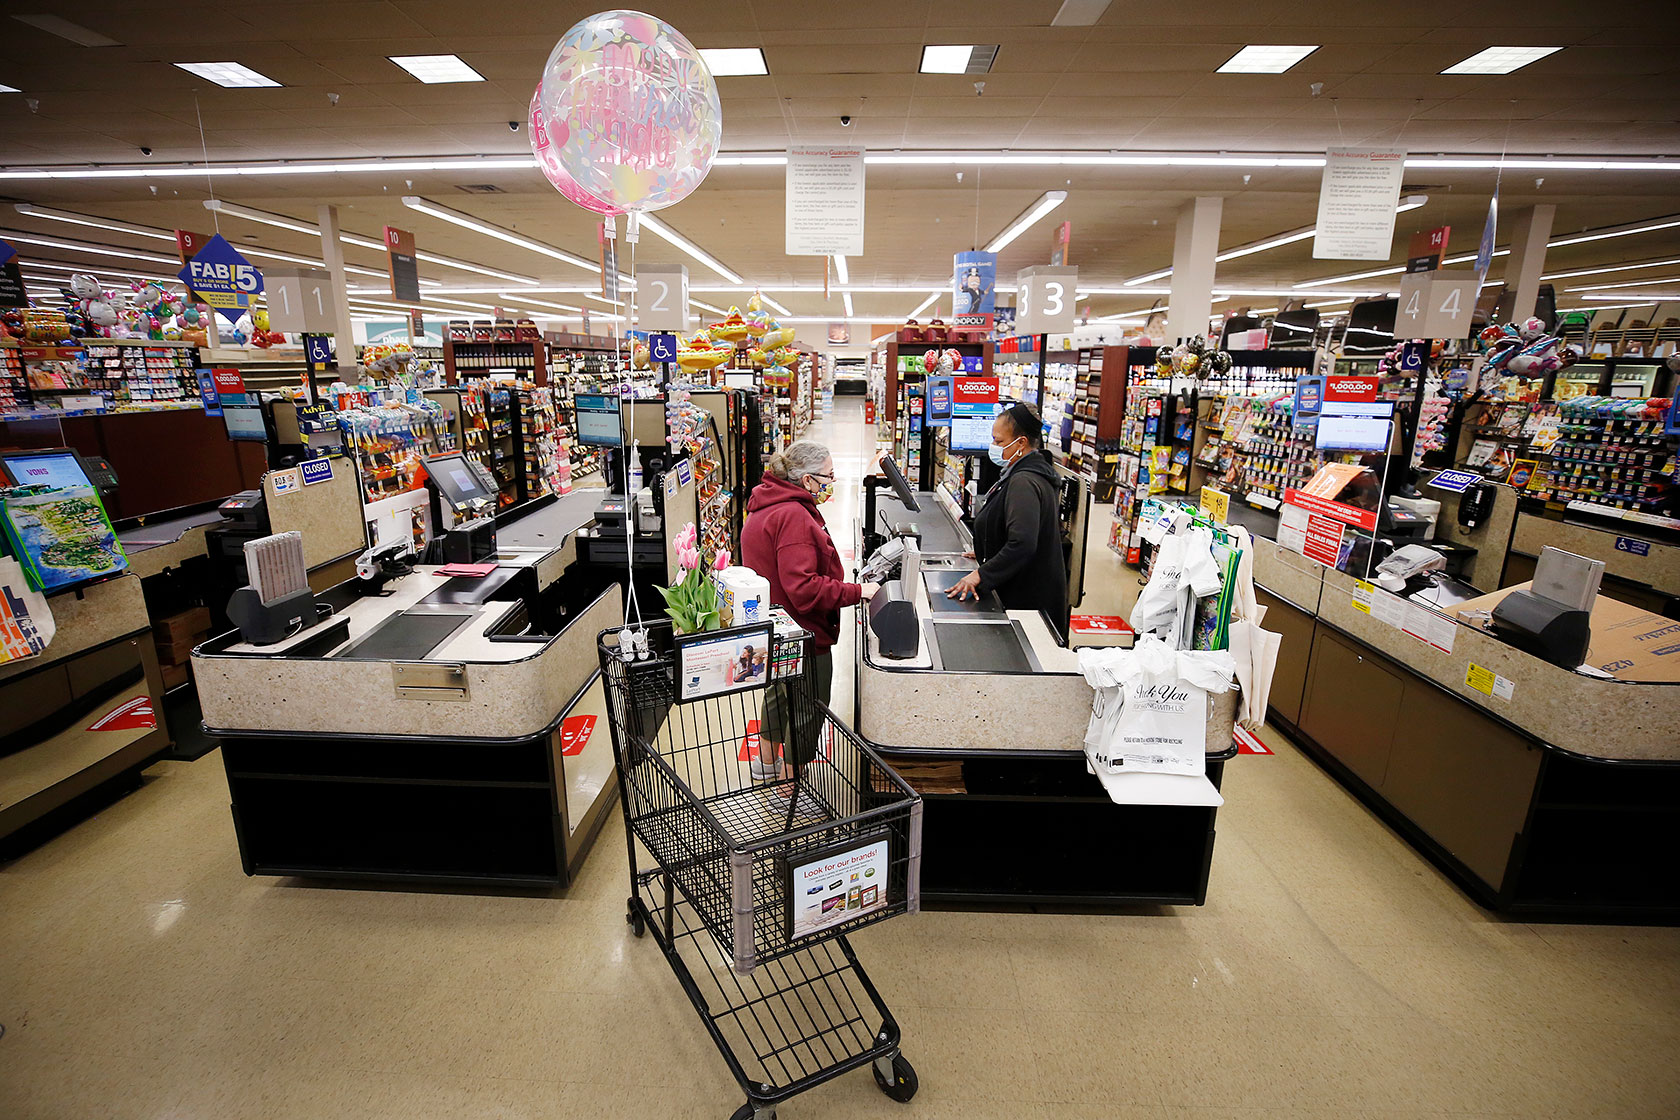 Photo shows a woman ringing up another woman in a grocery store